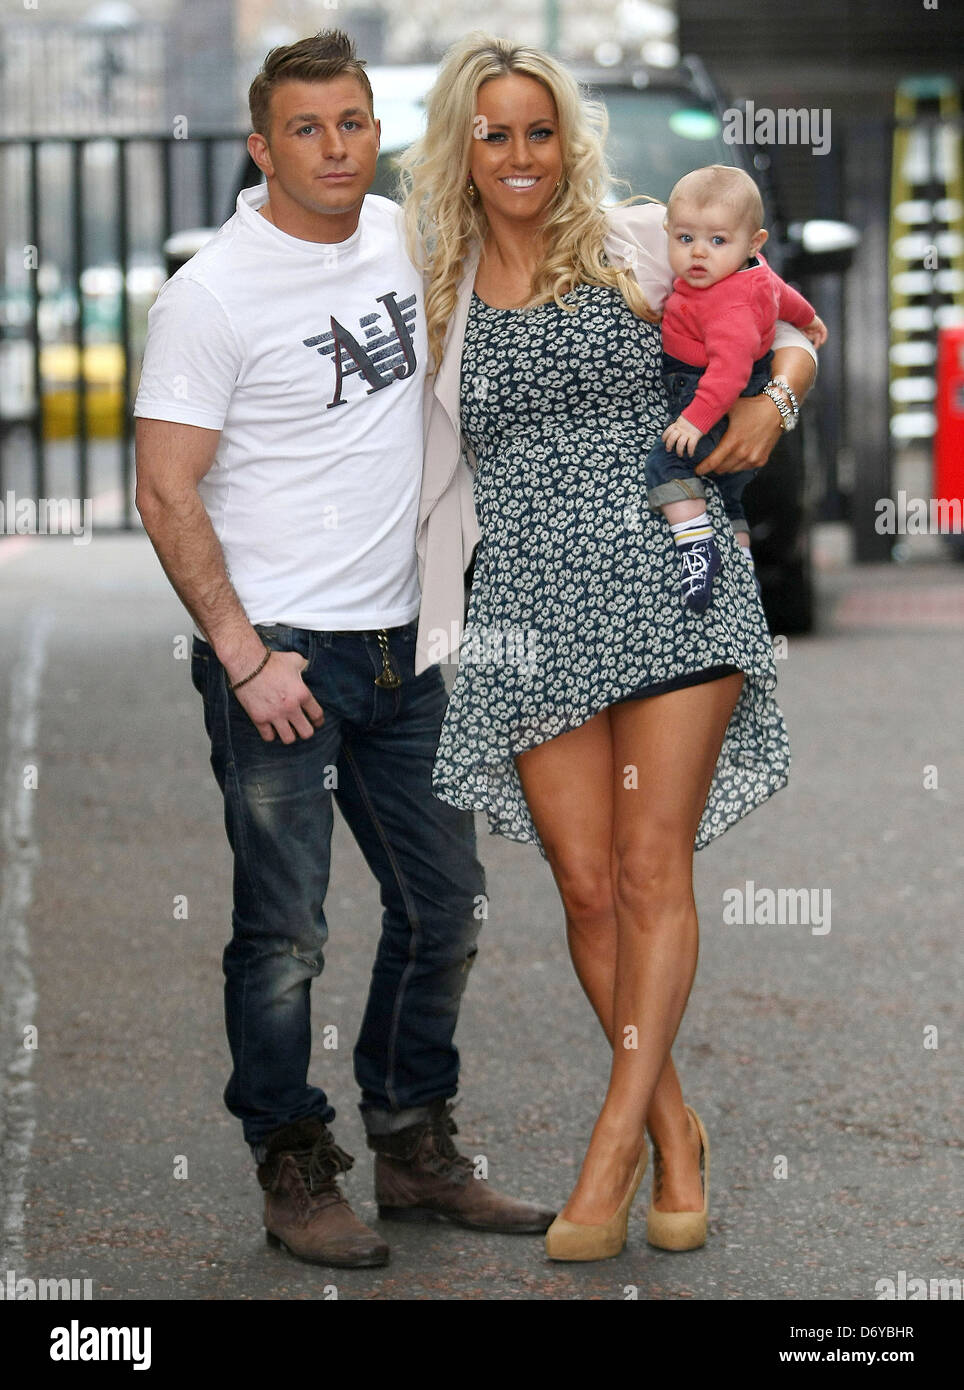 Danielle Mason and Tony Giles of 'Big Fat Gypsy Weddings' with their son  Rudy at the ITV studios London, England - 06.03.12 Stock Photo - Alamy